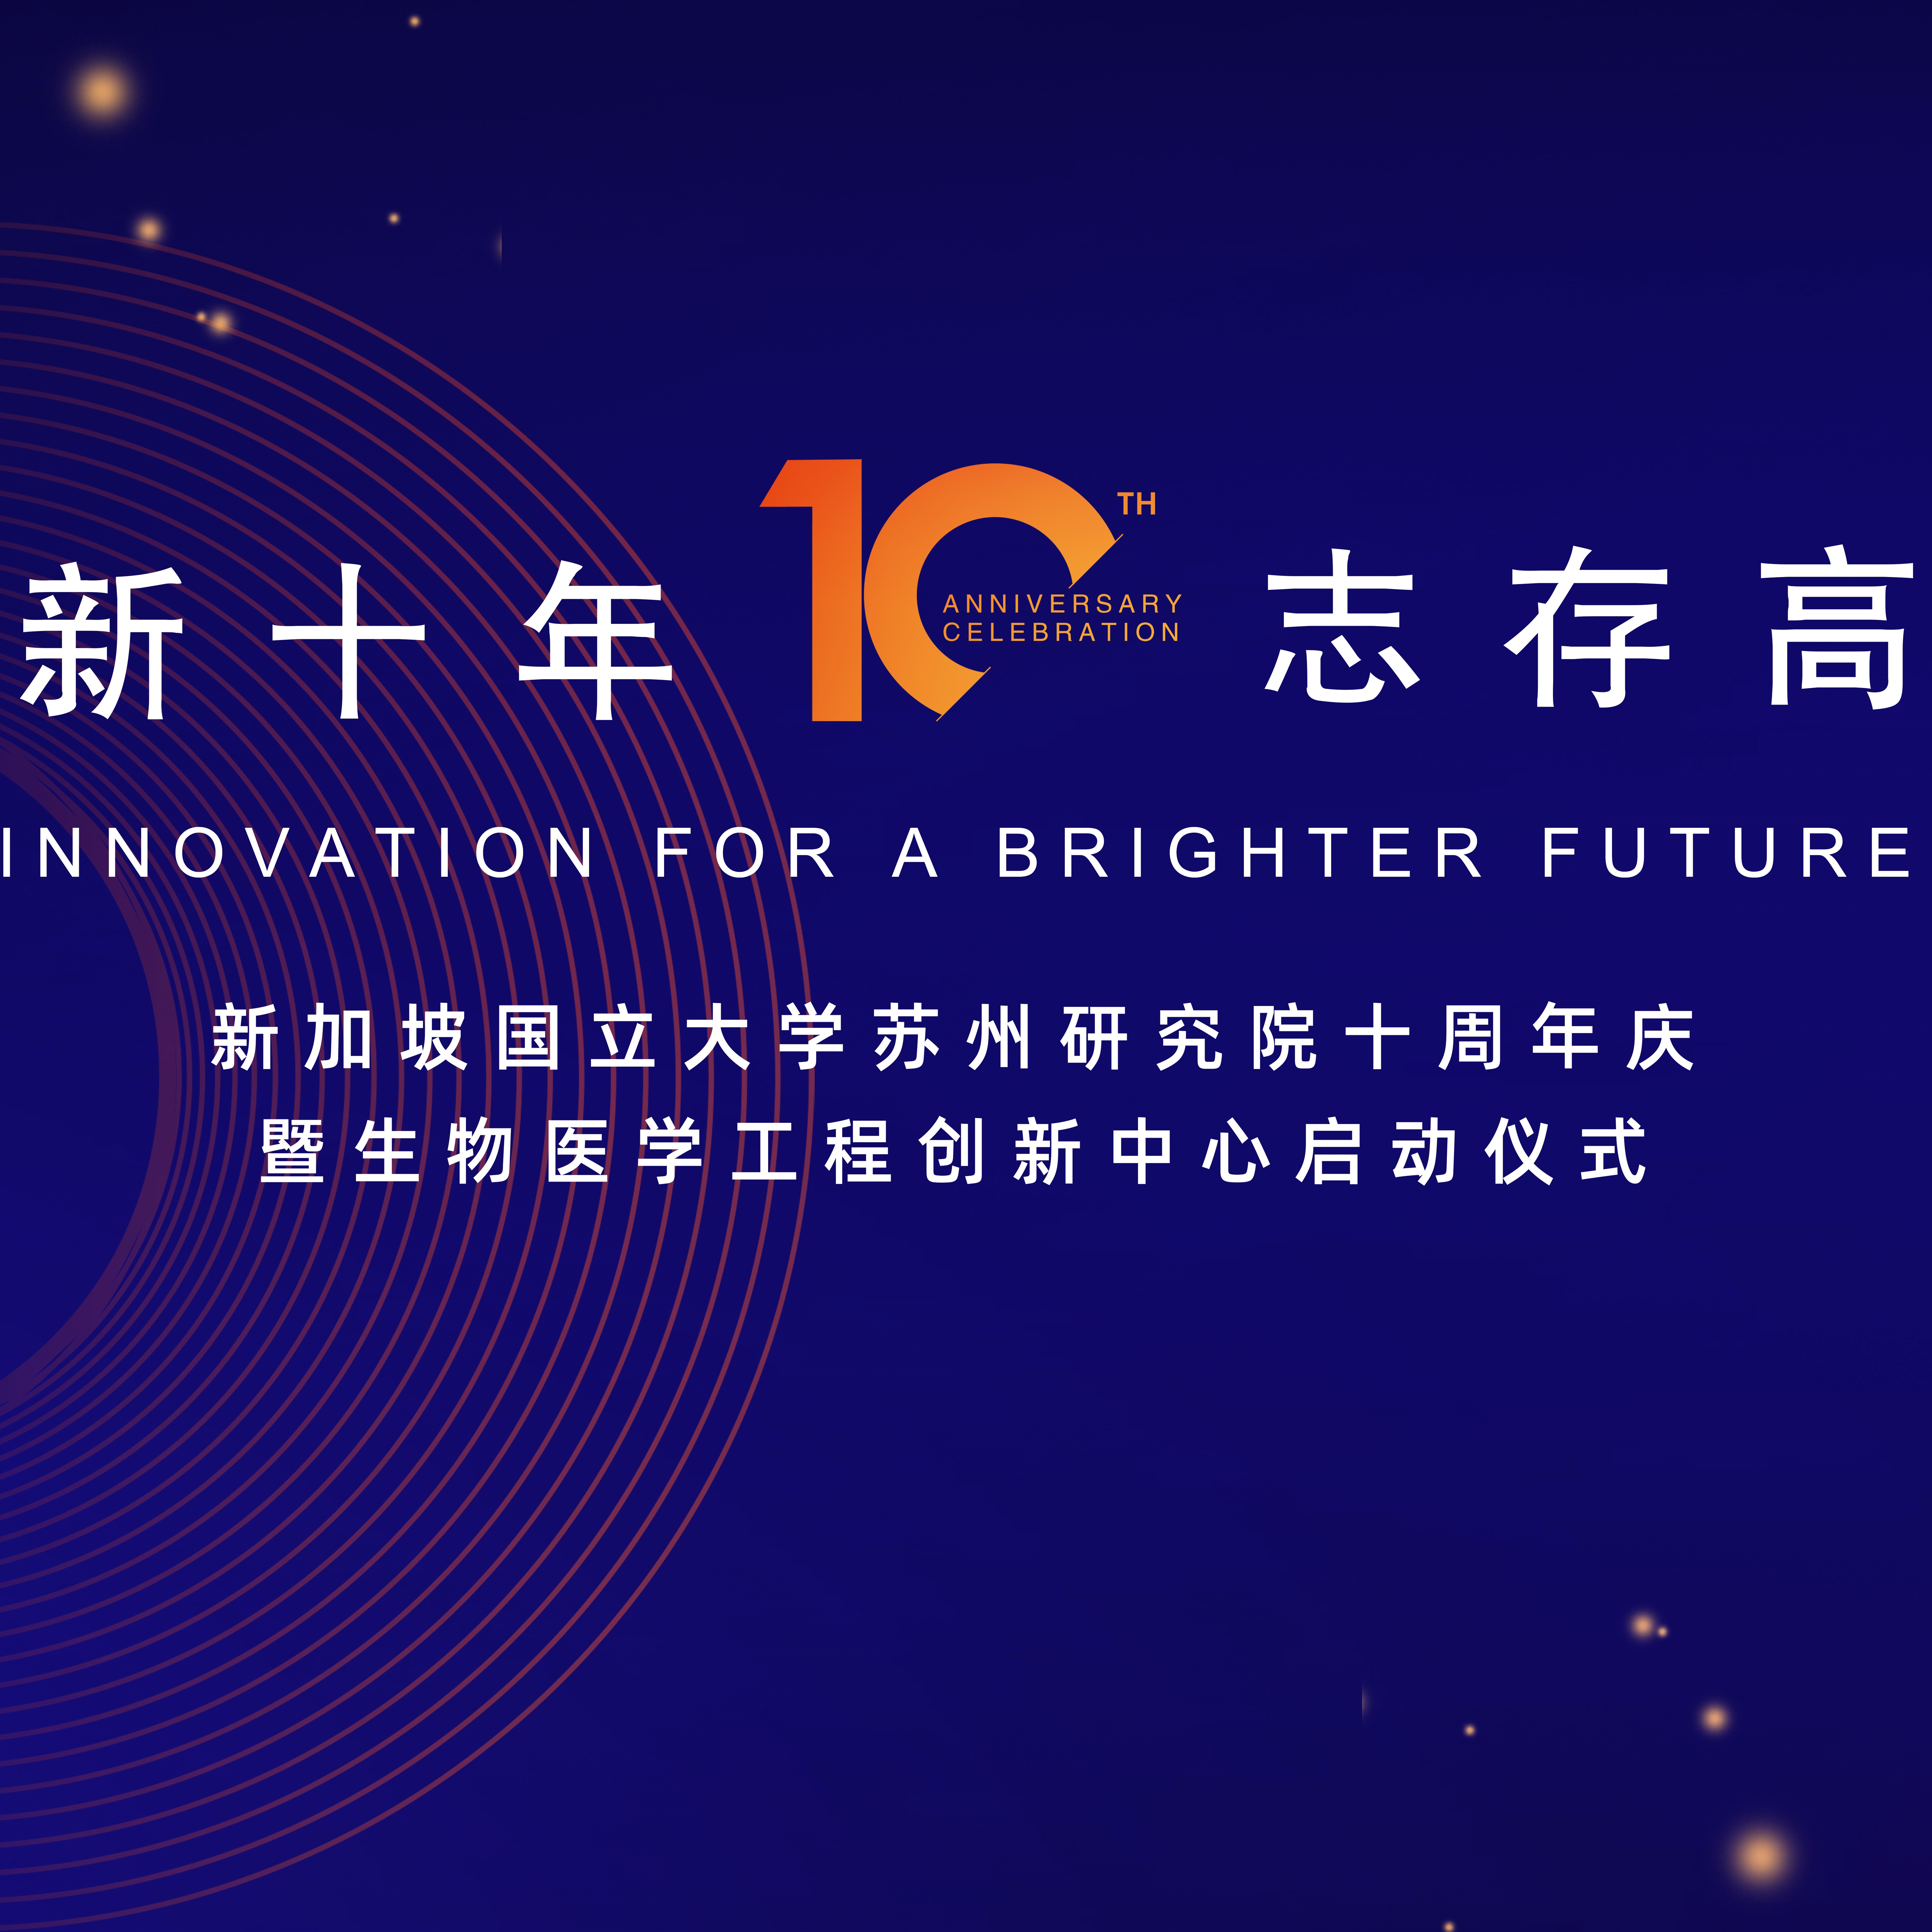 Innovation for a Brighter Future